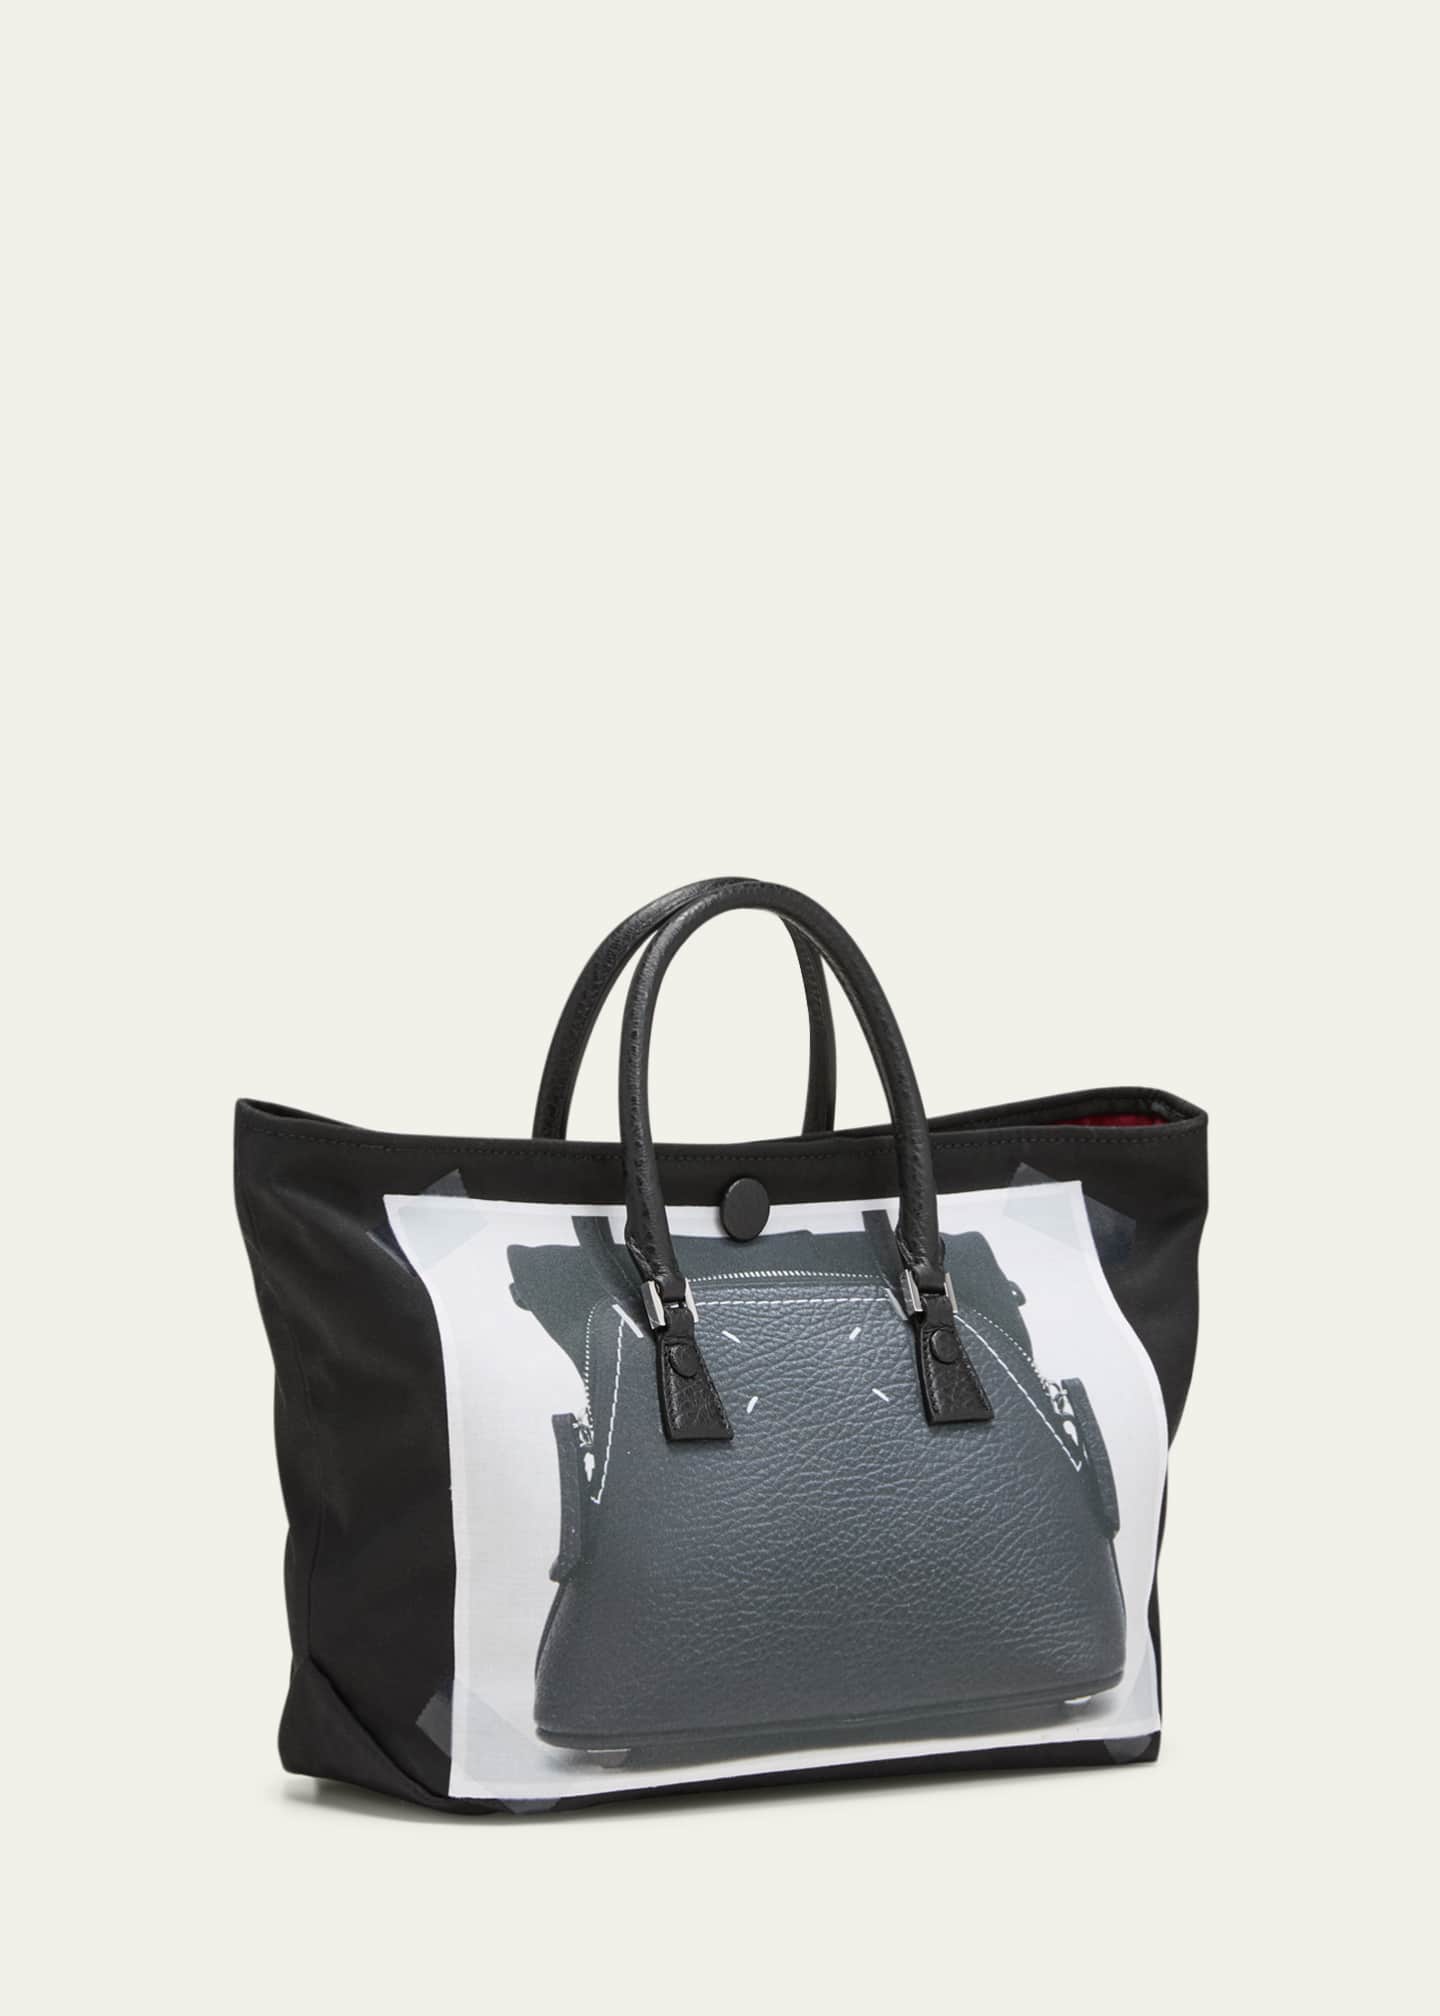 5AC Micro leather tote